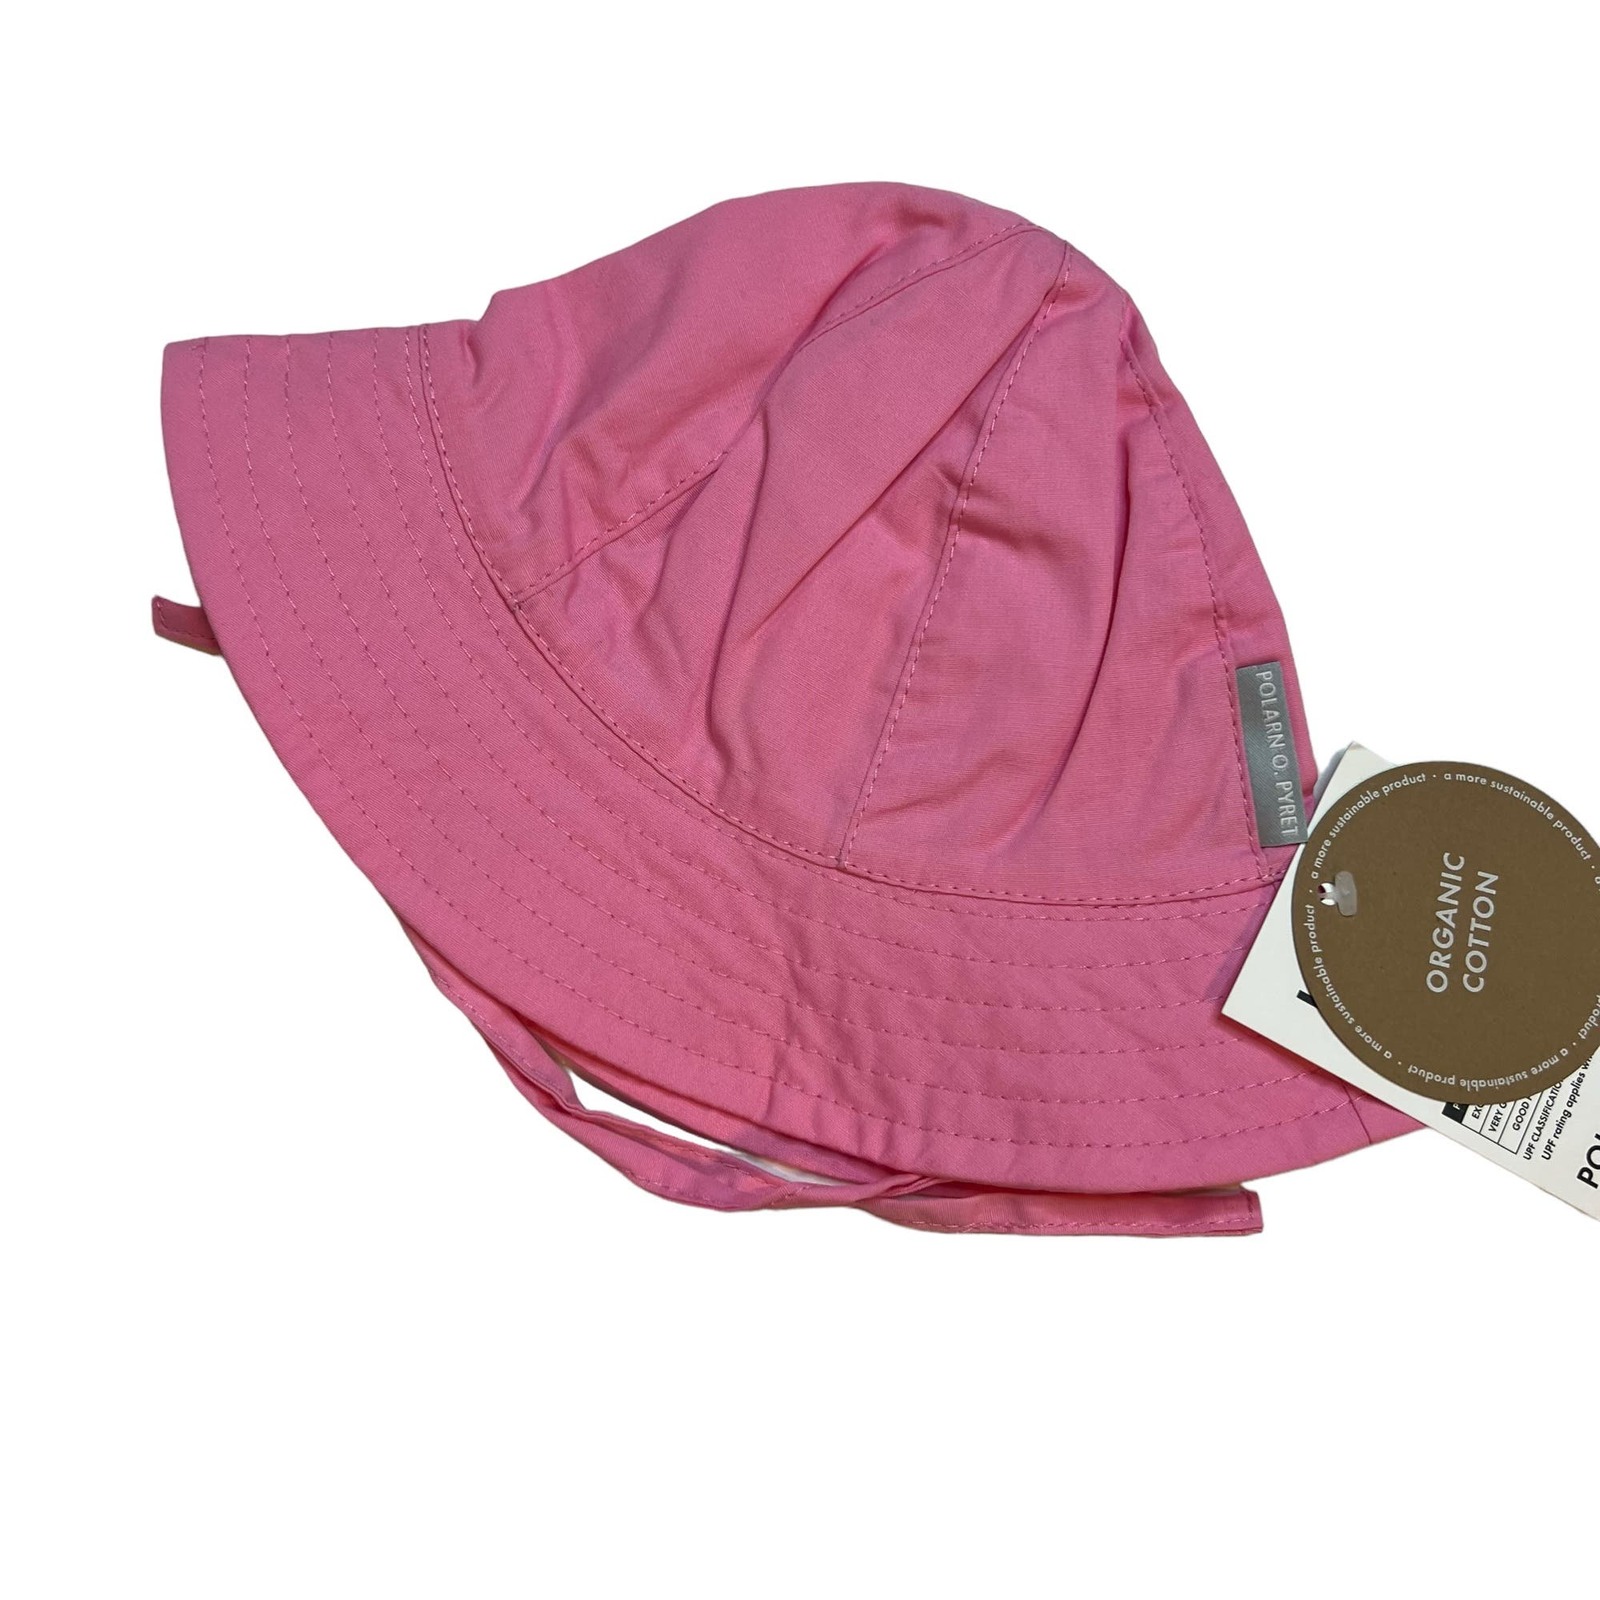 Primary image for Polarn O Pyret Pink Organic Cotton Sun Hat 2-4 Month New